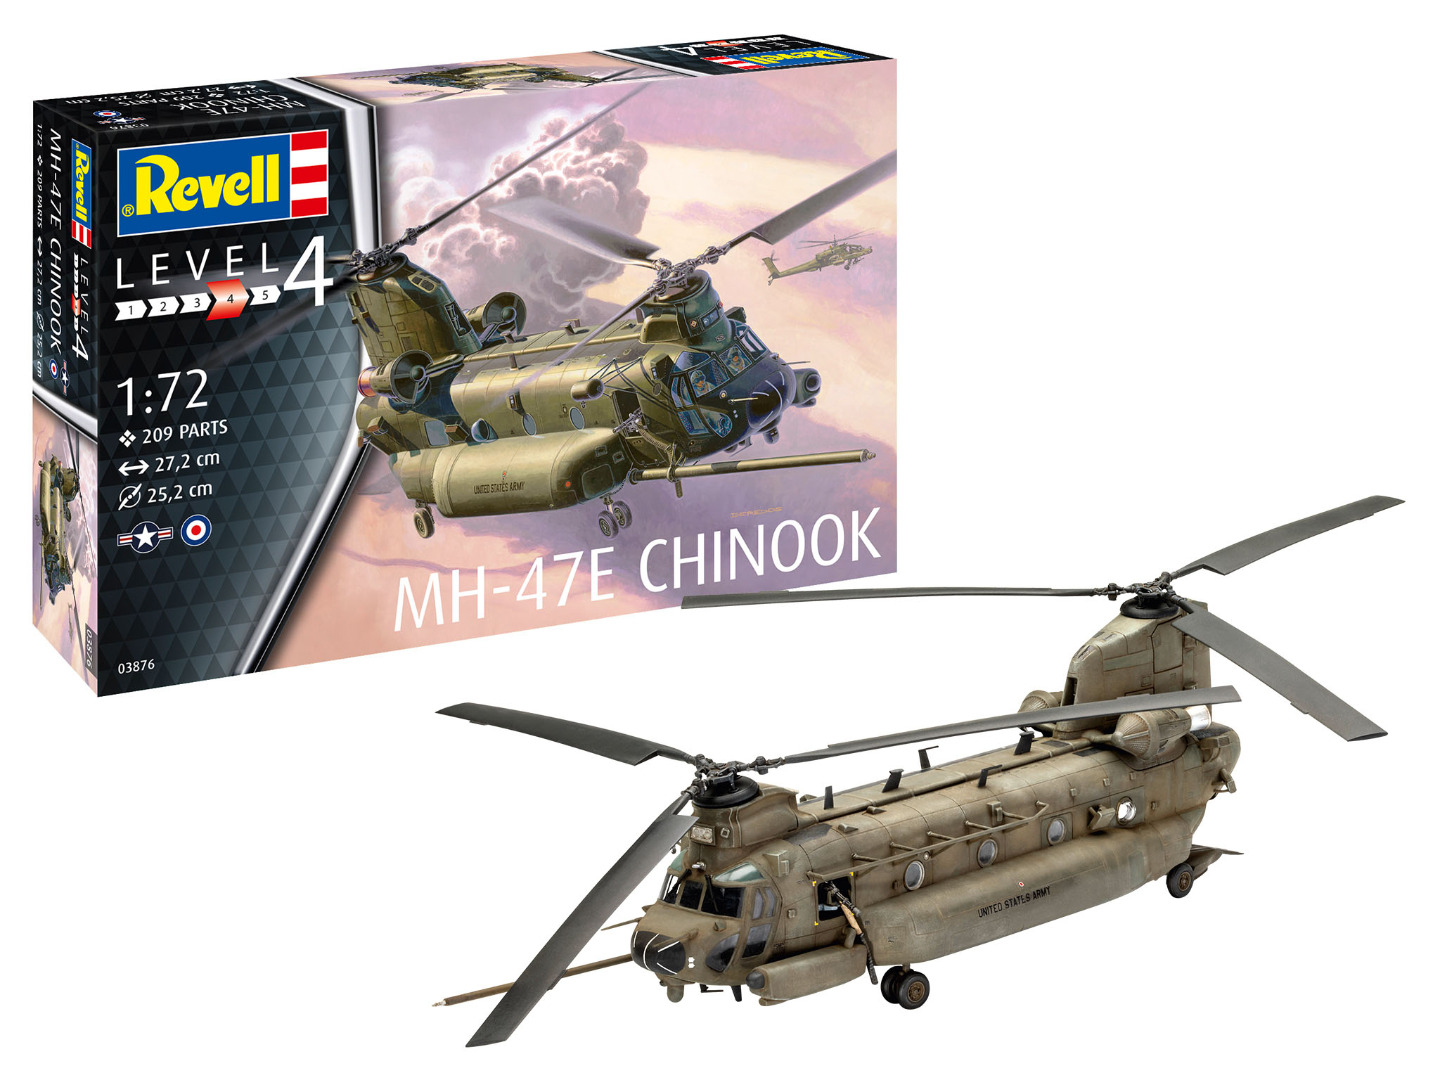 Revell Model Kit MH-47E Chinook Scale 1:72